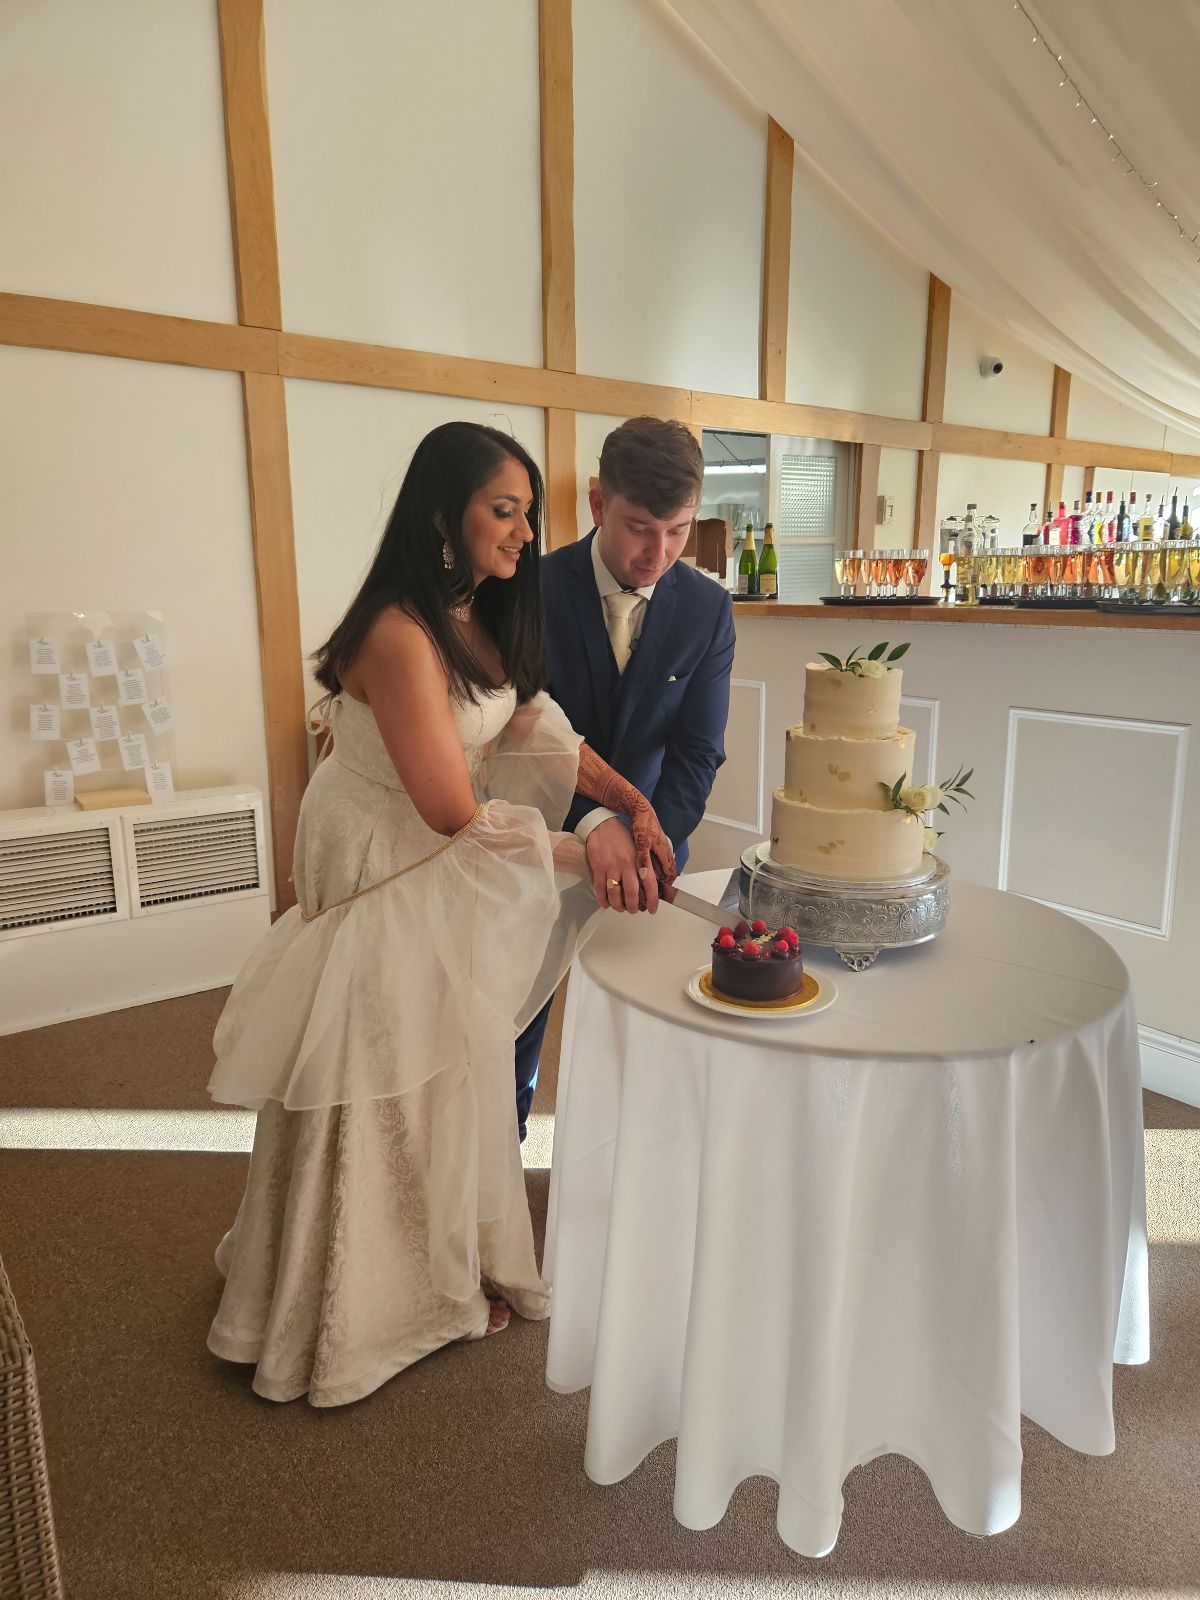 Cutting of the cake